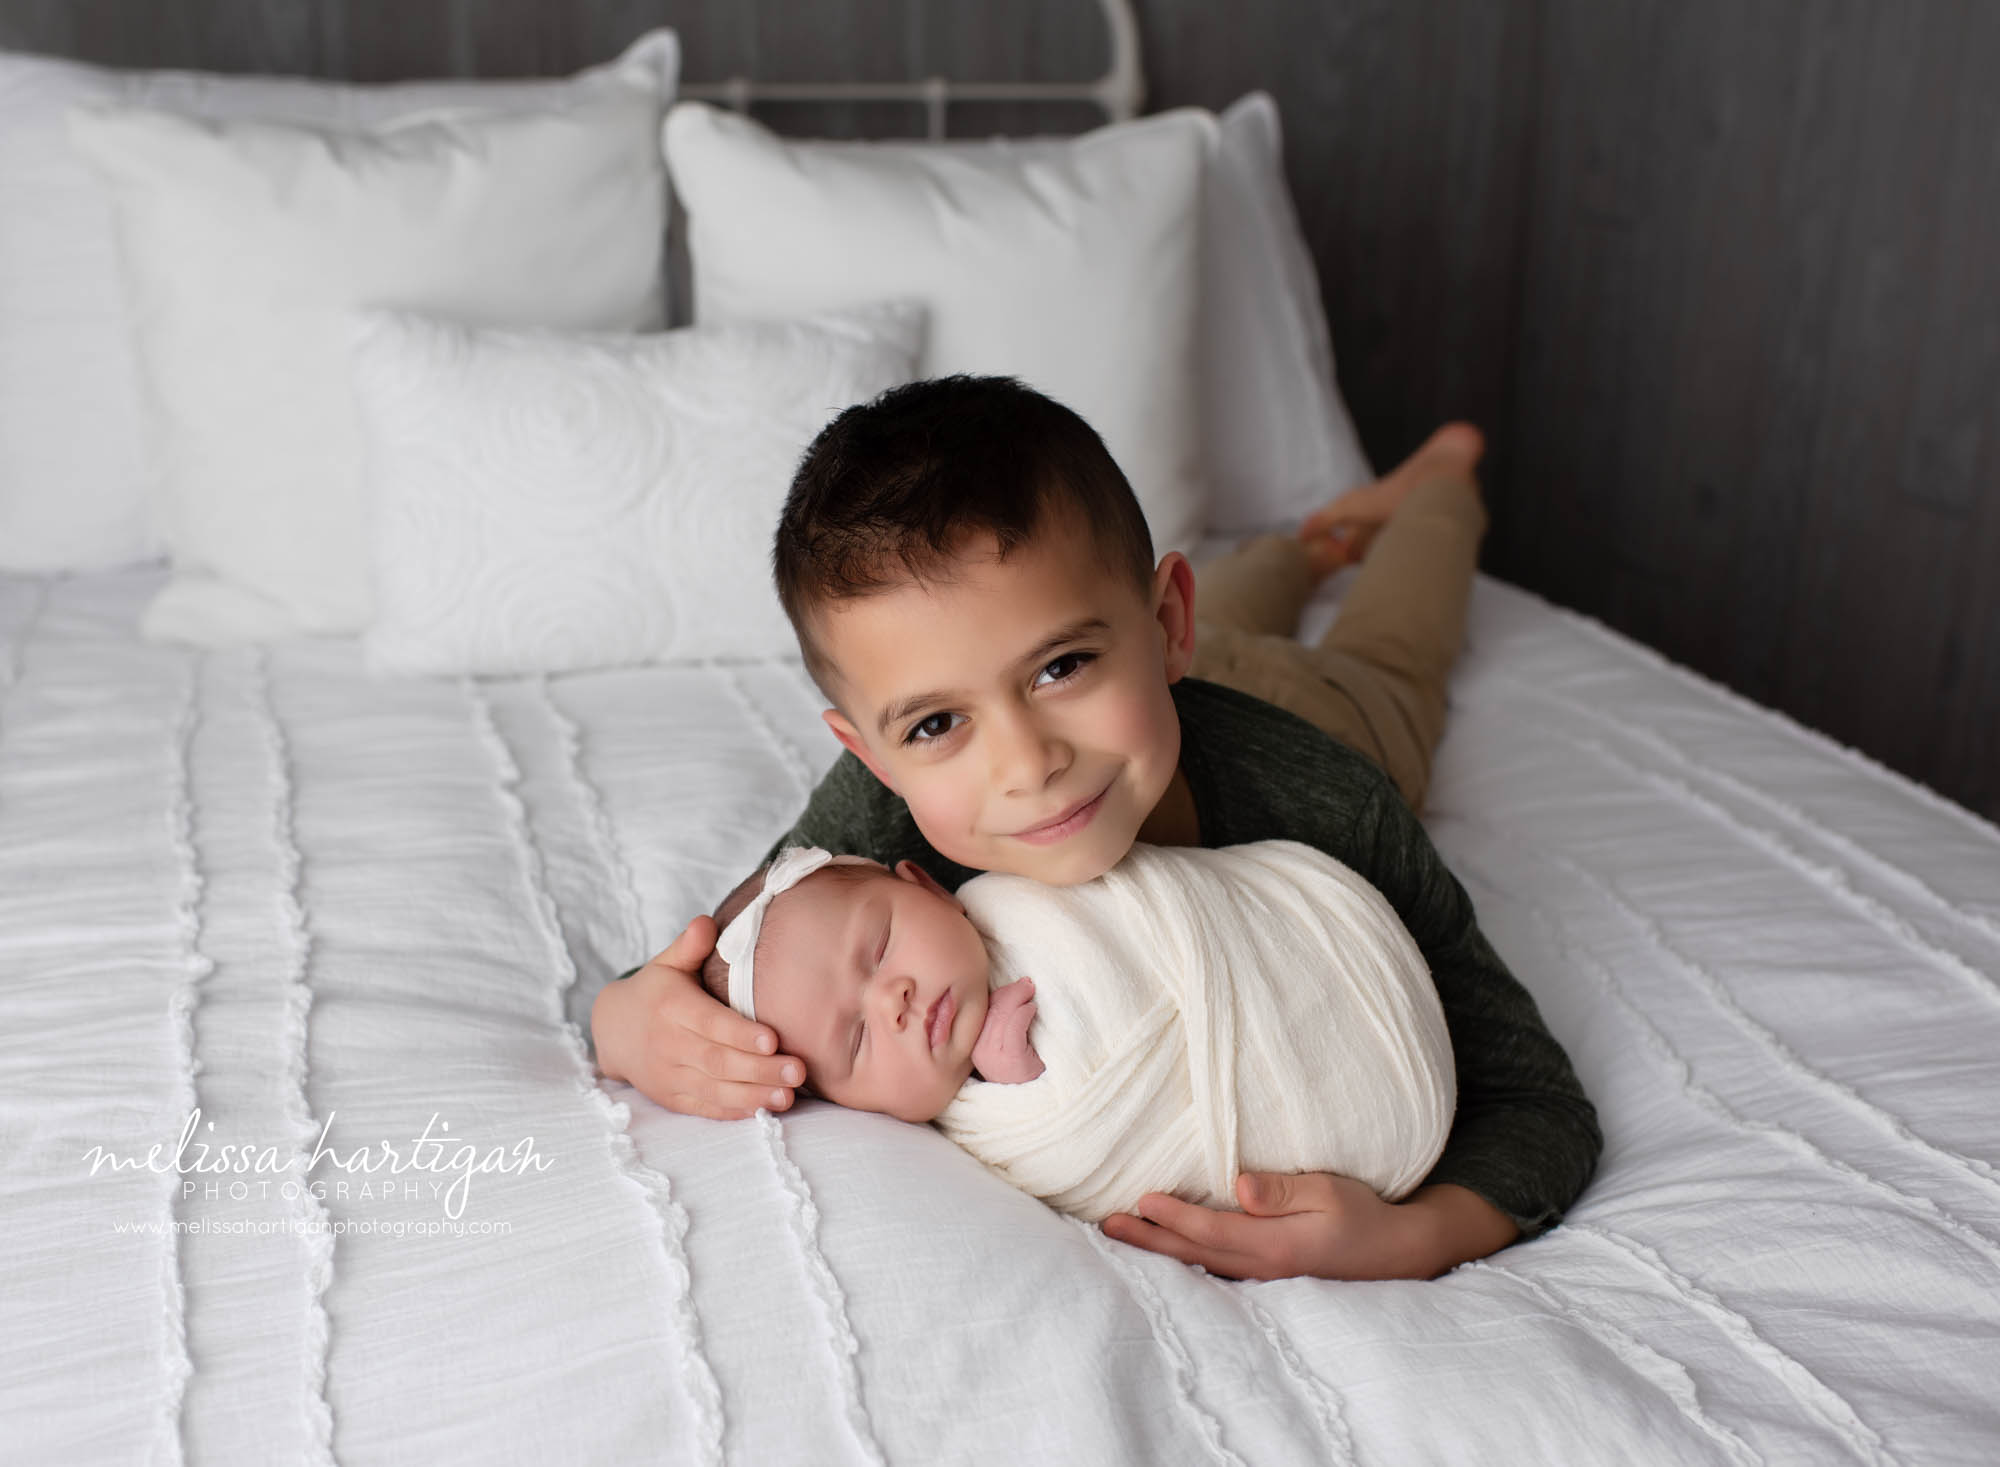 Older brother holding newborn baby sister on bed in studio session